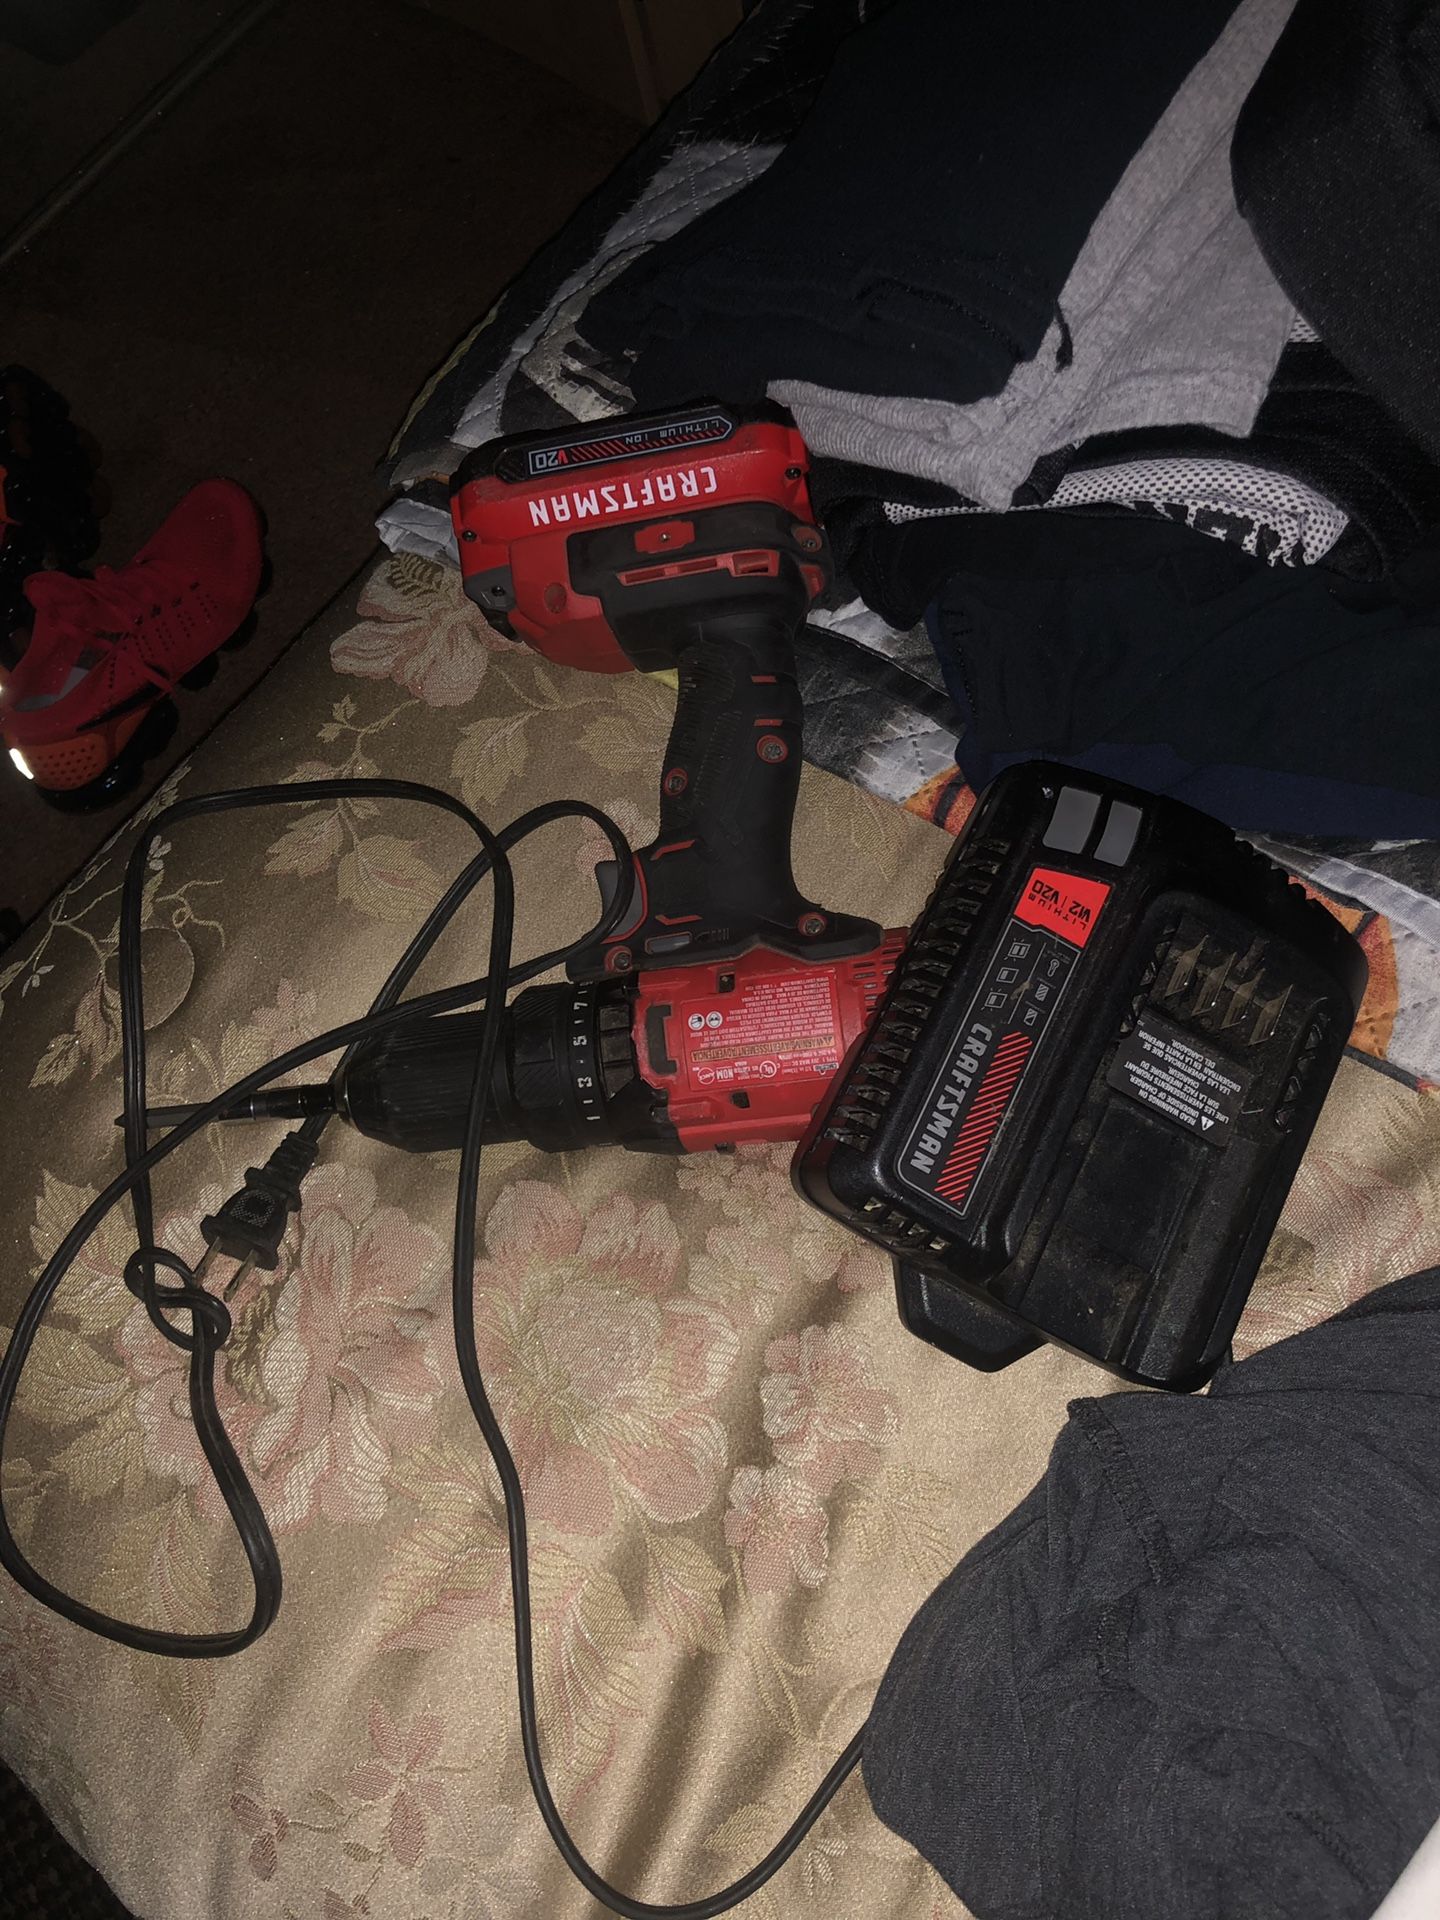 Craftsman hammer drill with charger and 2 batteries